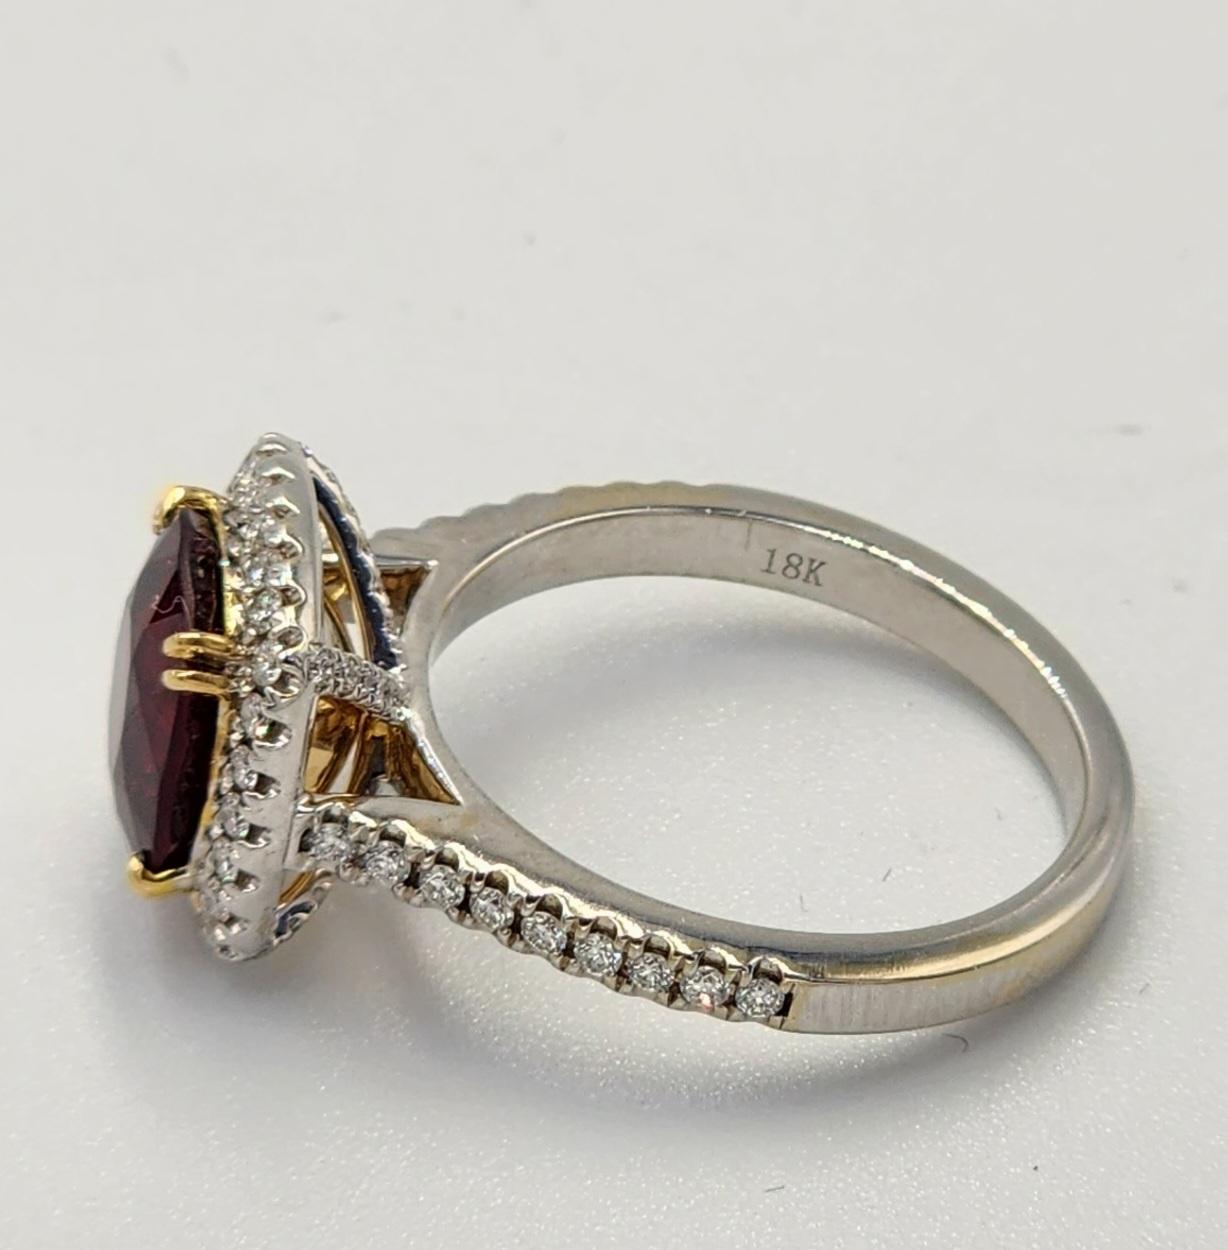 Mixed Cut GIA Certified 3.15 Carat Vivid Red Fire Spinel Diamond Cocktail Ring